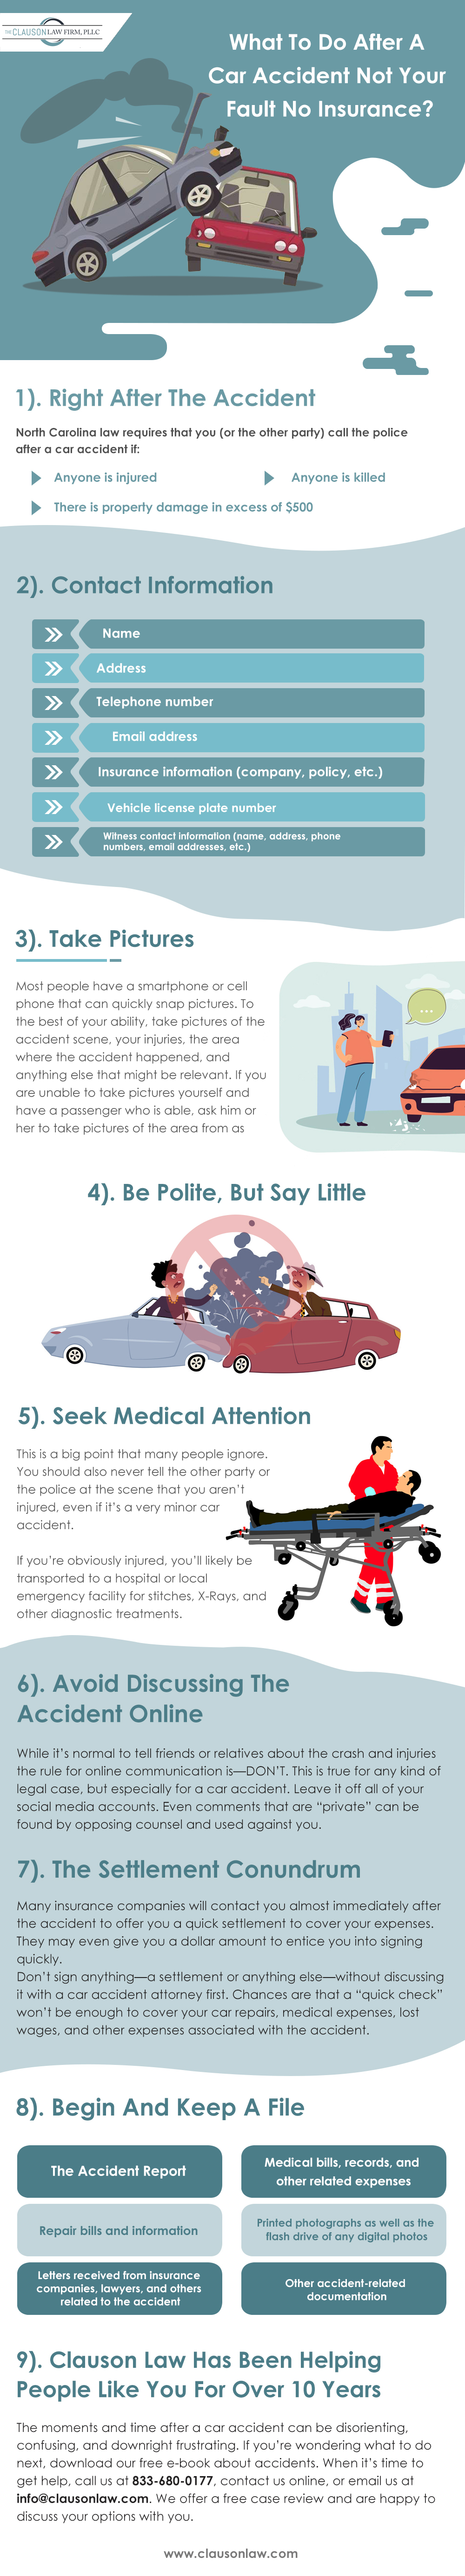 What To Do After A Car Accident Not Your Fault No Insurance? Infographic